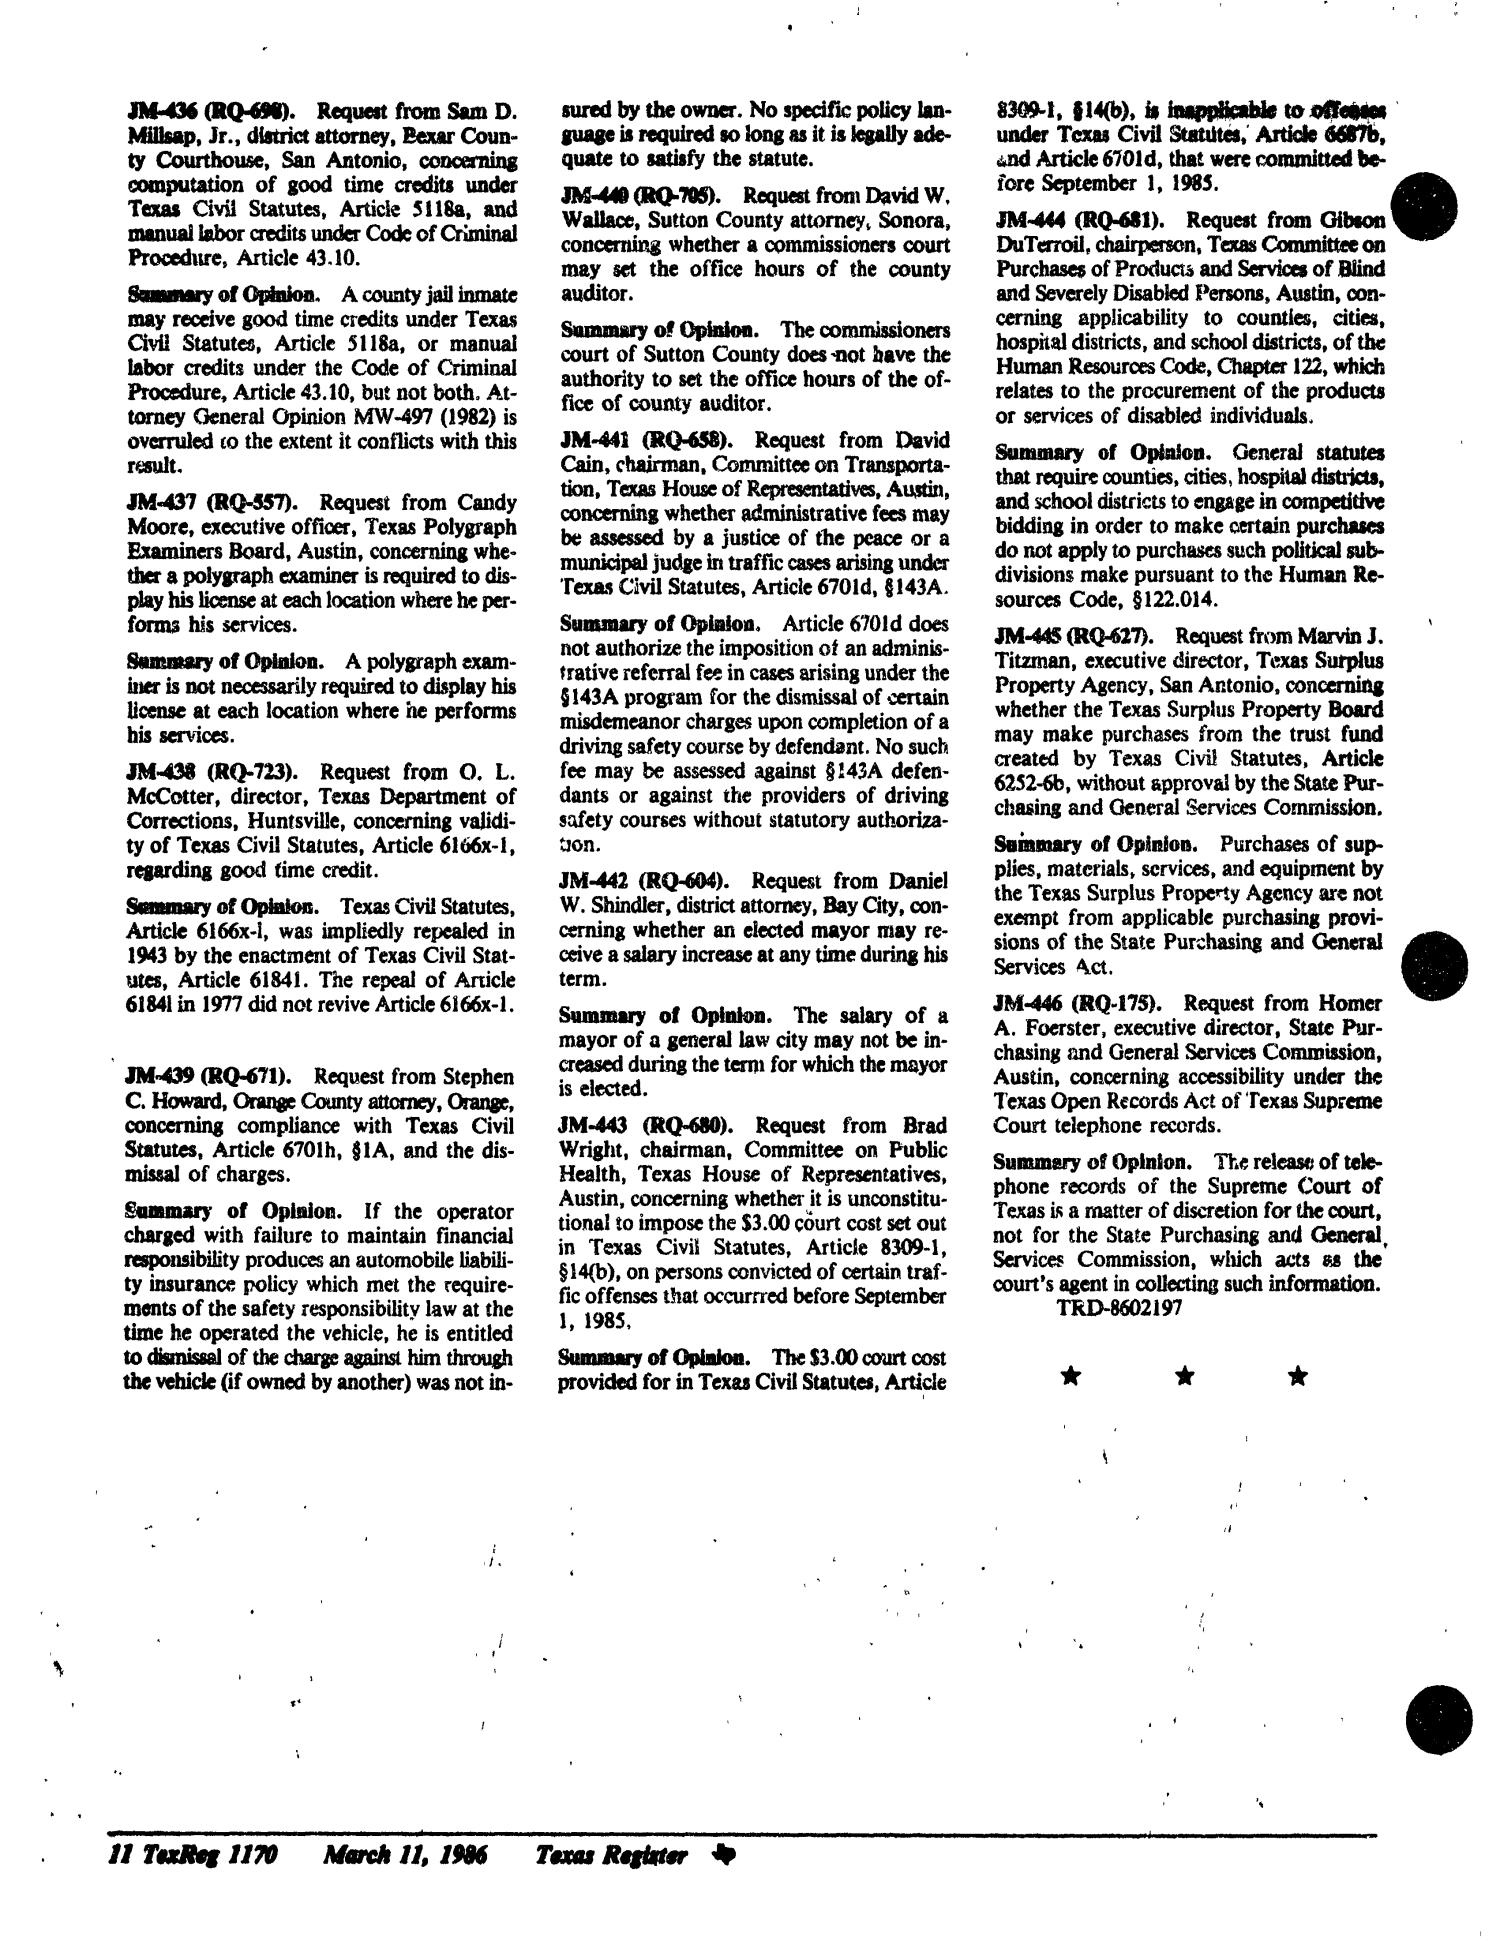 Texas Register, Volume 11, Number 19, Pages 1163-1244, March 11, 1986
                                                
                                                    1170
                                                